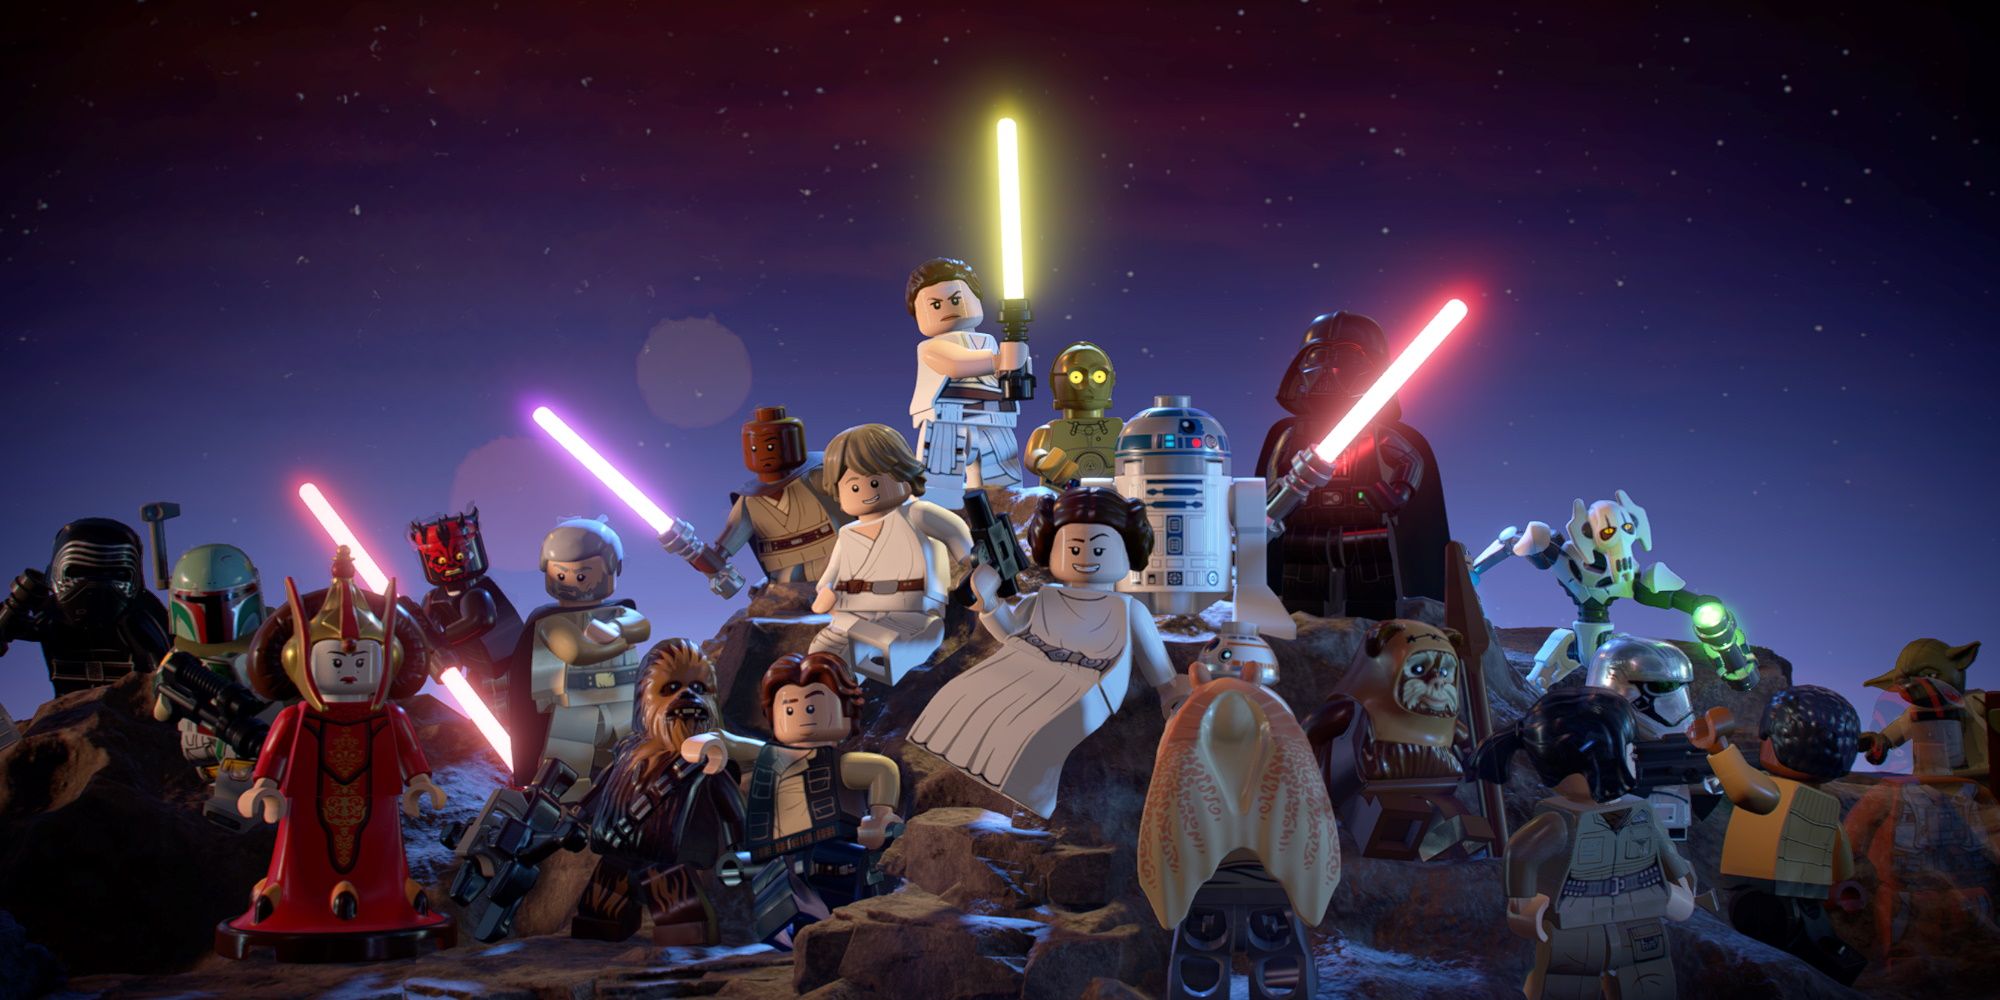 Lego Star Wars Skywalker Saga Opening Image With Characters From Every Film